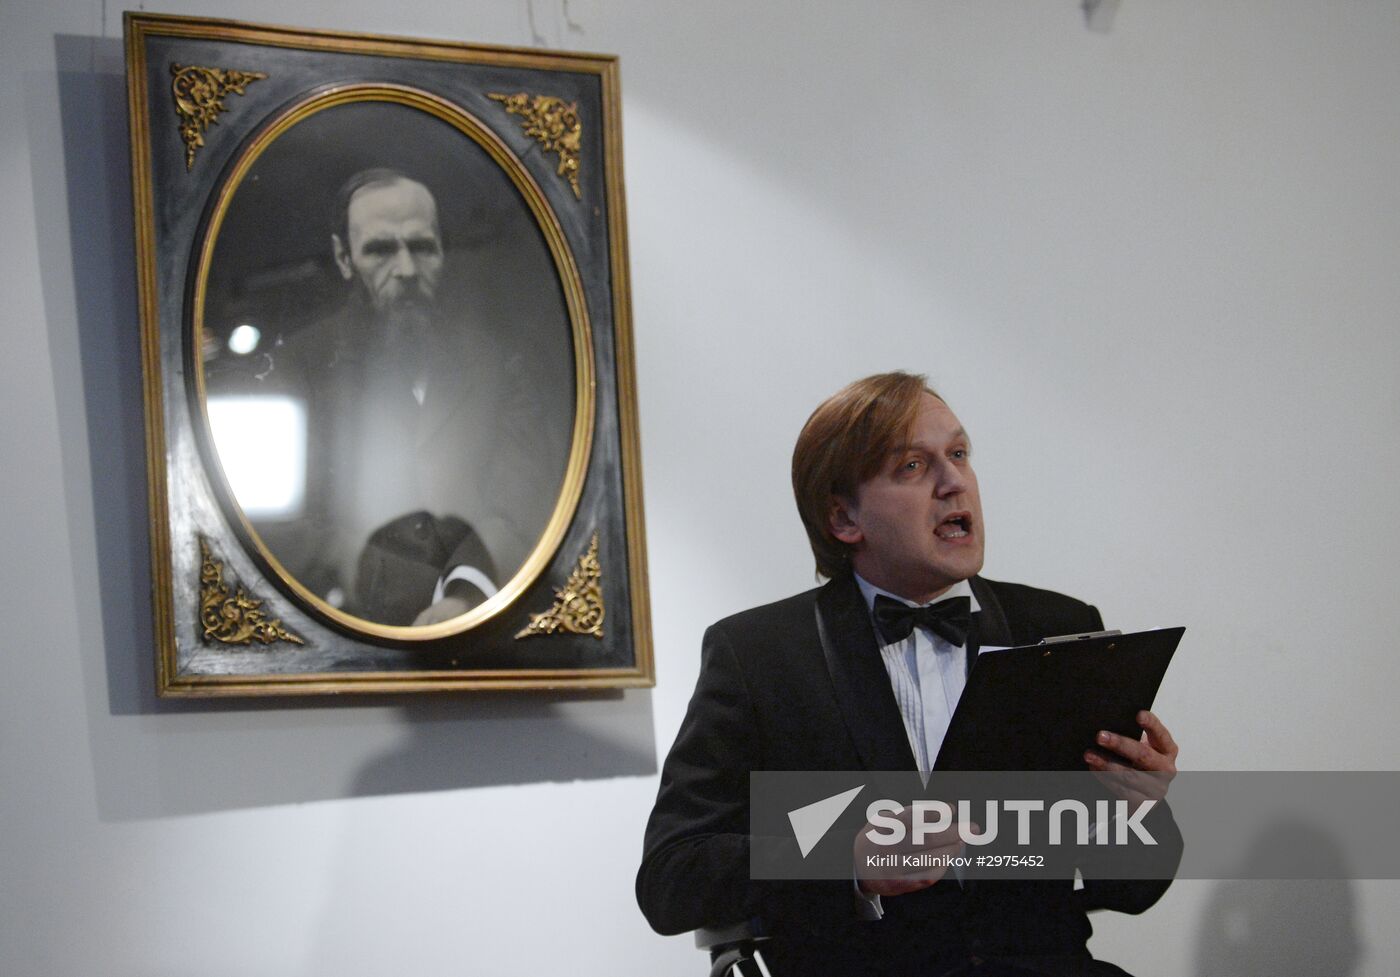 Celebration of the 150th anniversary of Dostoevsky's novel "Crime and Punishment"